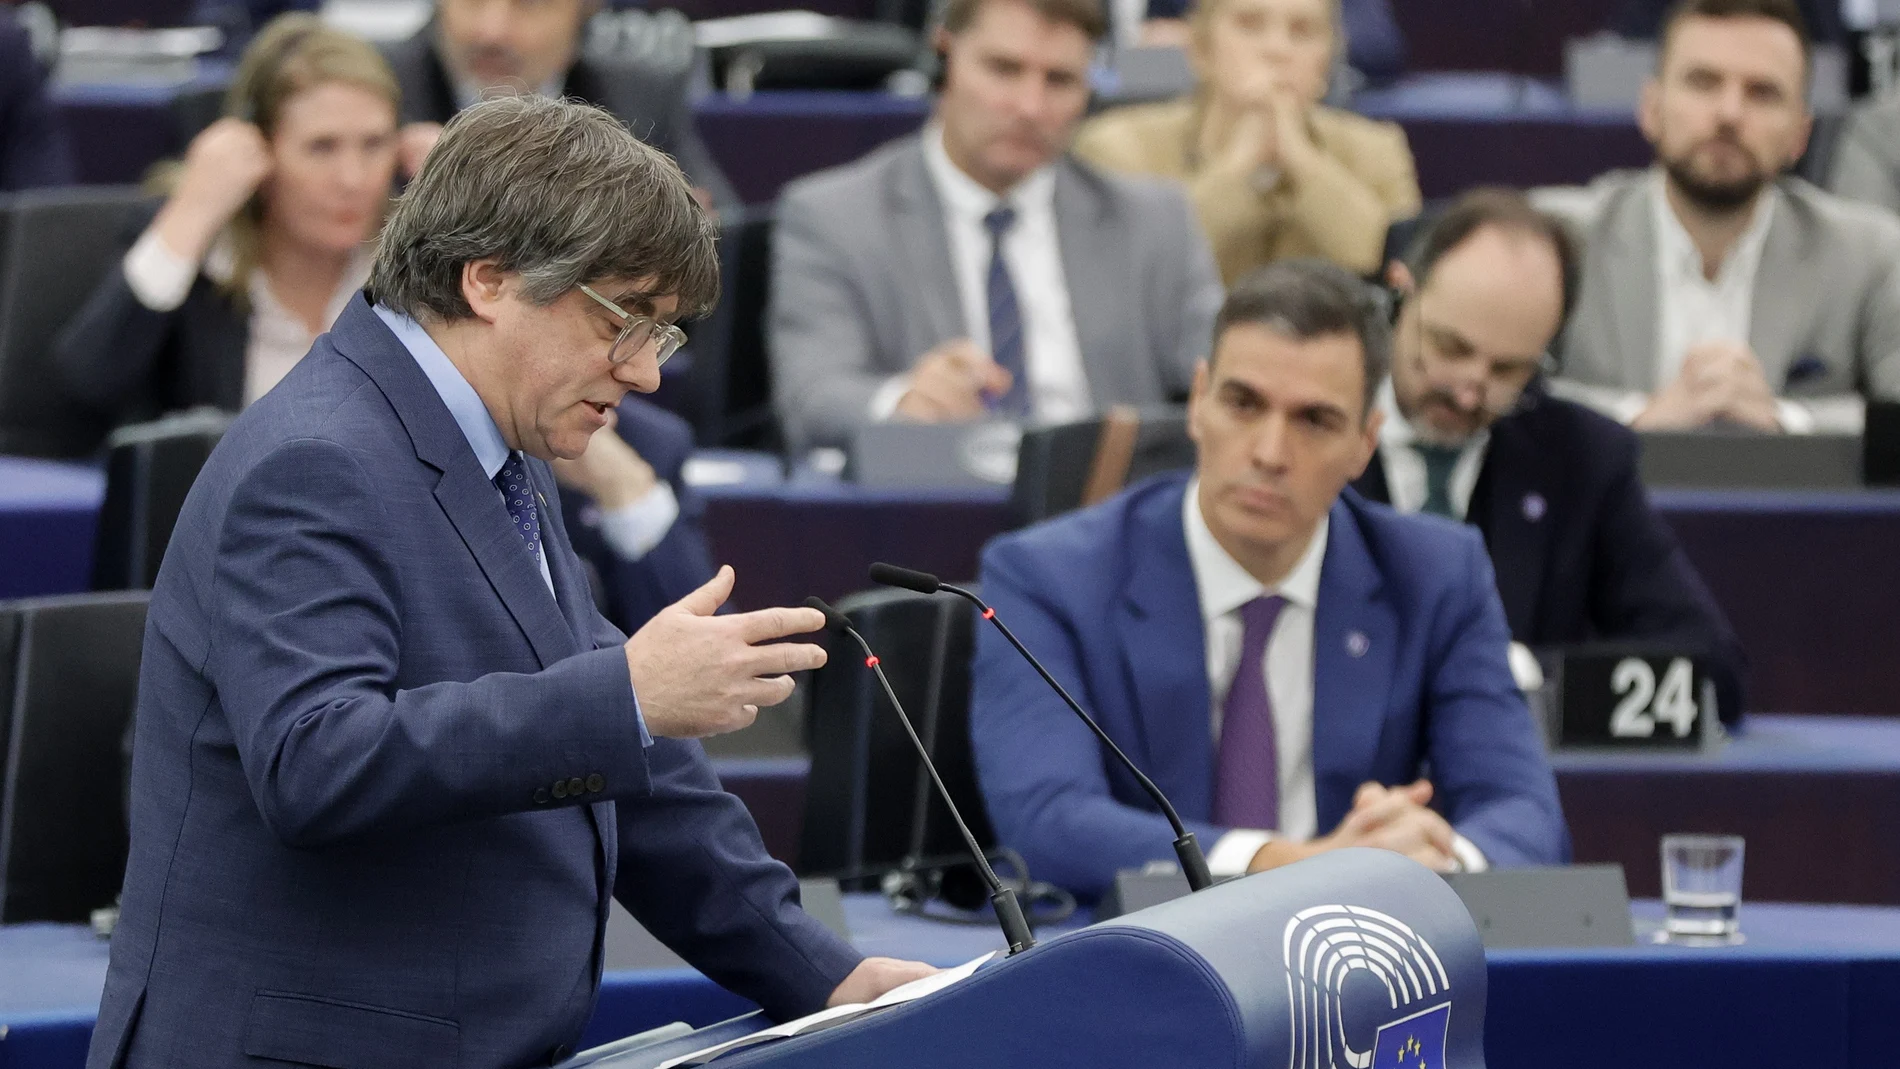 Former Catalan regional premier Carles Puigdemont speaks during a debate on 'Review of the Spanish Presidency of the Council' at the European Parliament in Strasbourg, France.